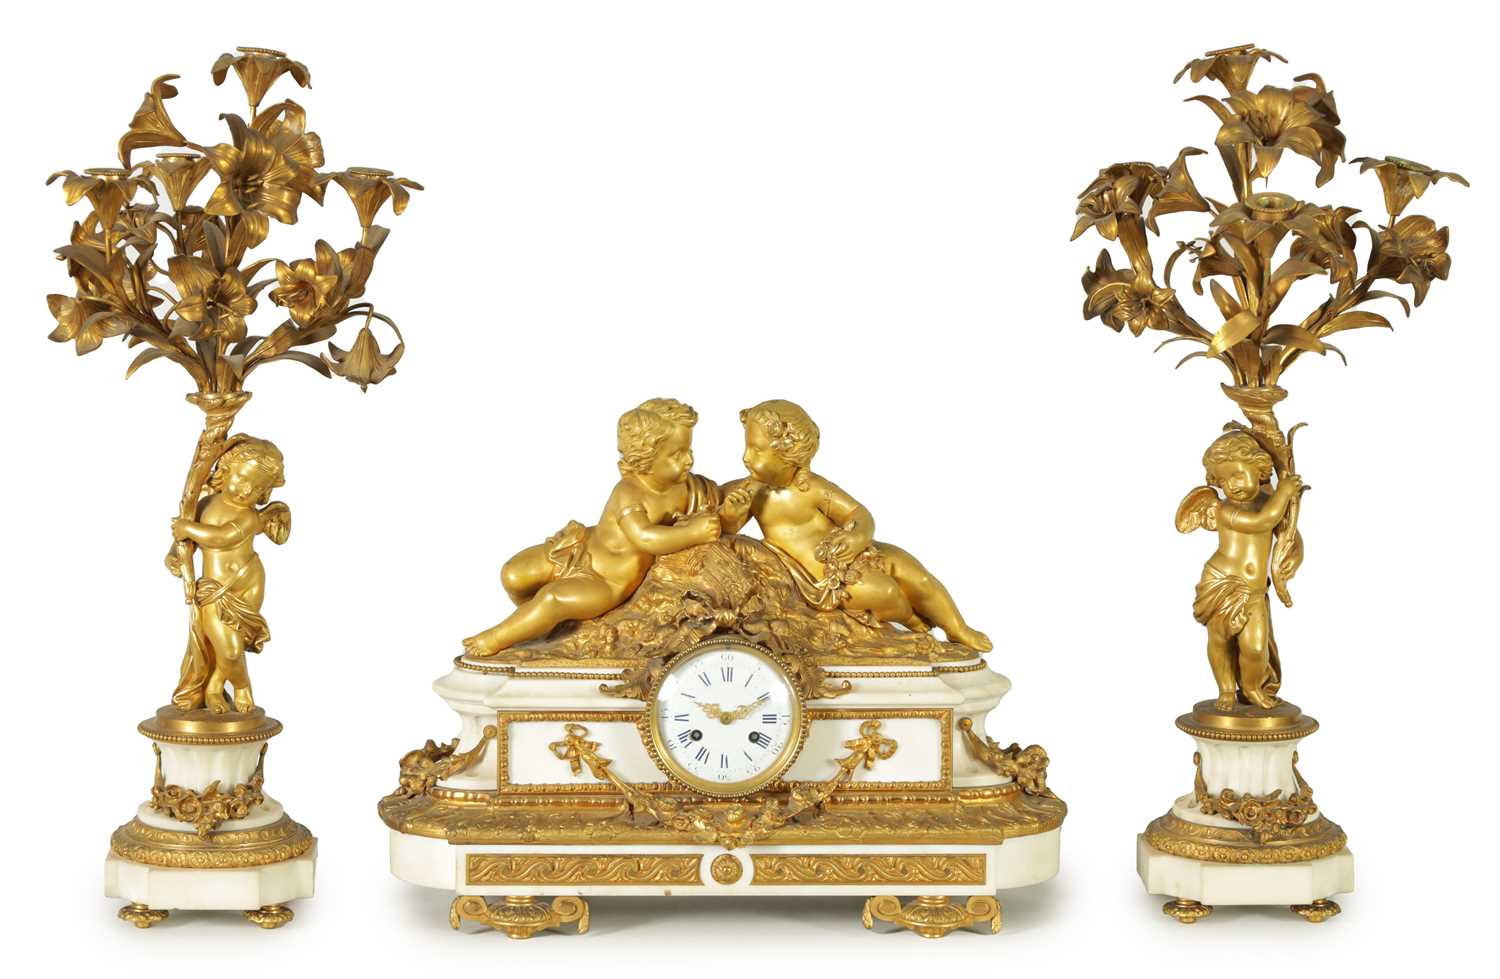 A LATE 19TH CENTURY ORMOLU AND WHITE MARBLE CLOCK GARNITURE